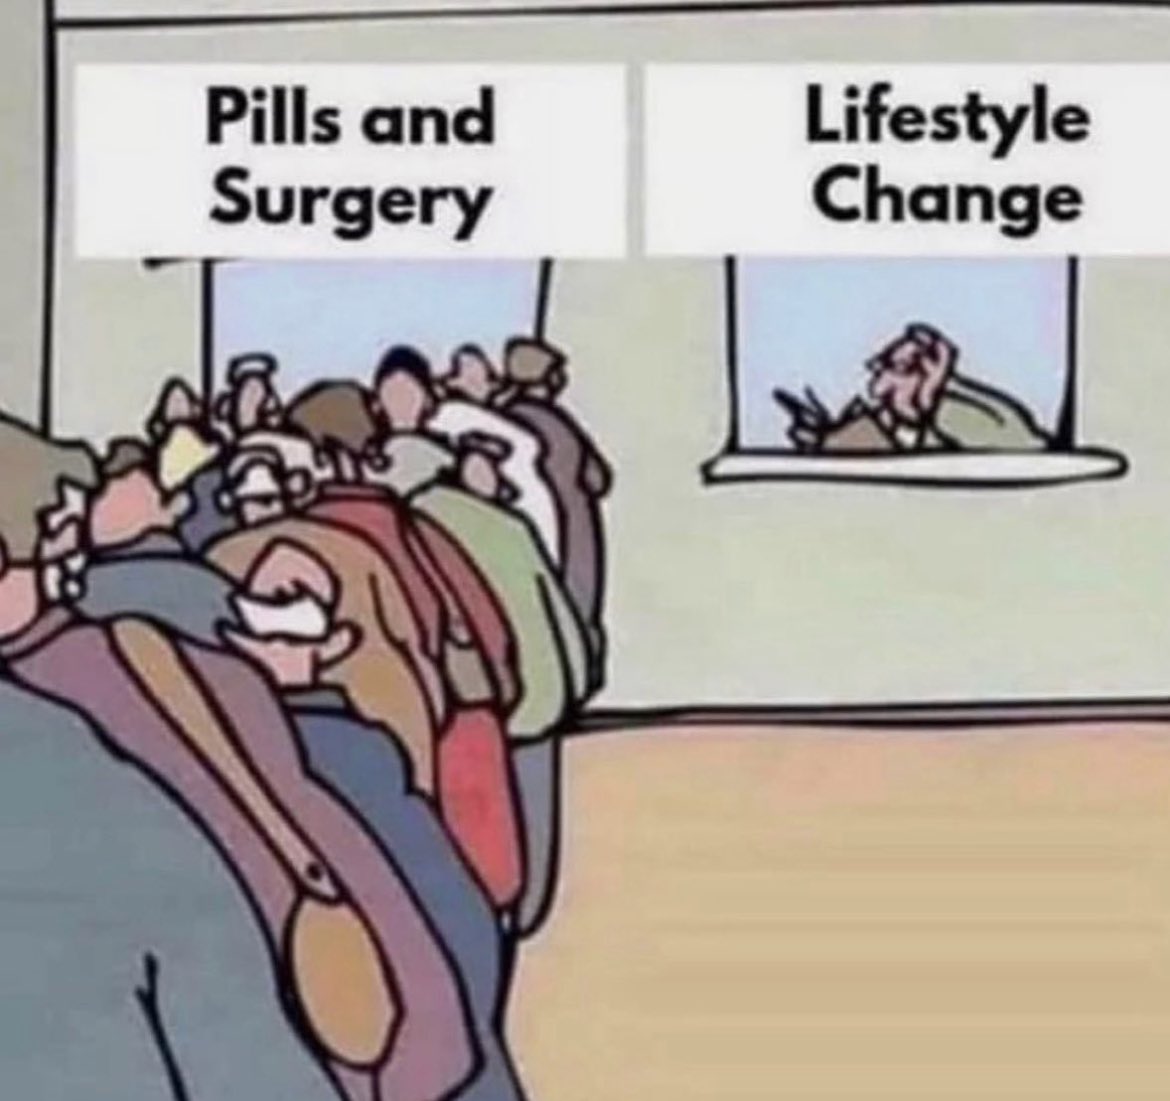 I see this daily with loved ones & strangers. 

The medical industry doesn’t care for your health. 

Take responsibility & start making small changes every day. #FuckPharma